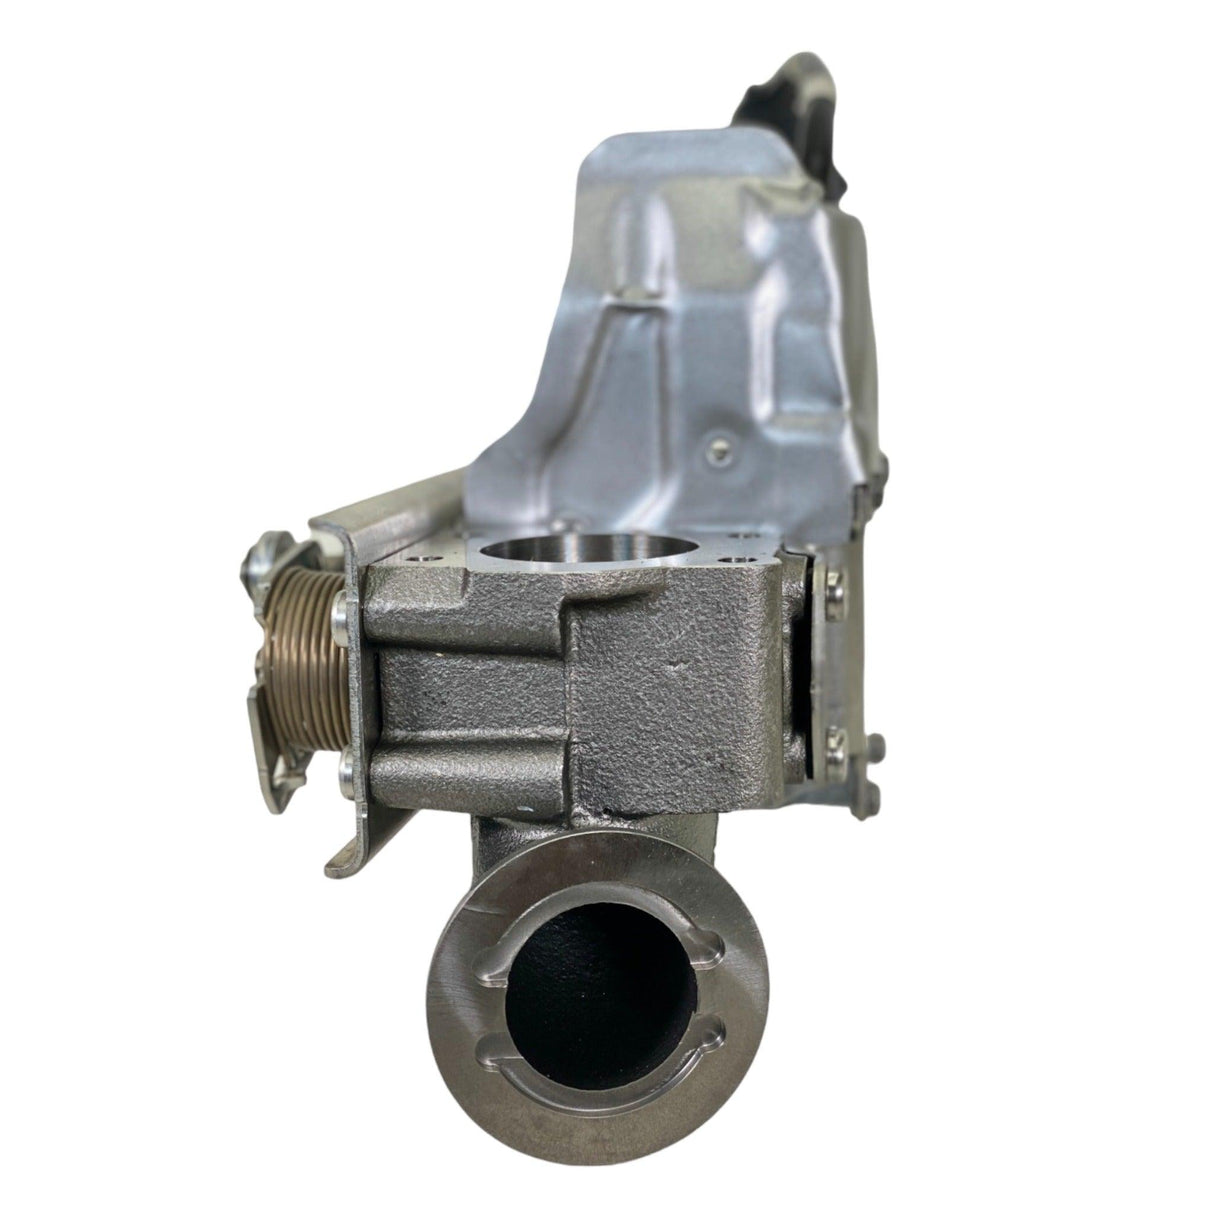 2162360 Genuine Paccar Egr Control Valve For Paccar Engine